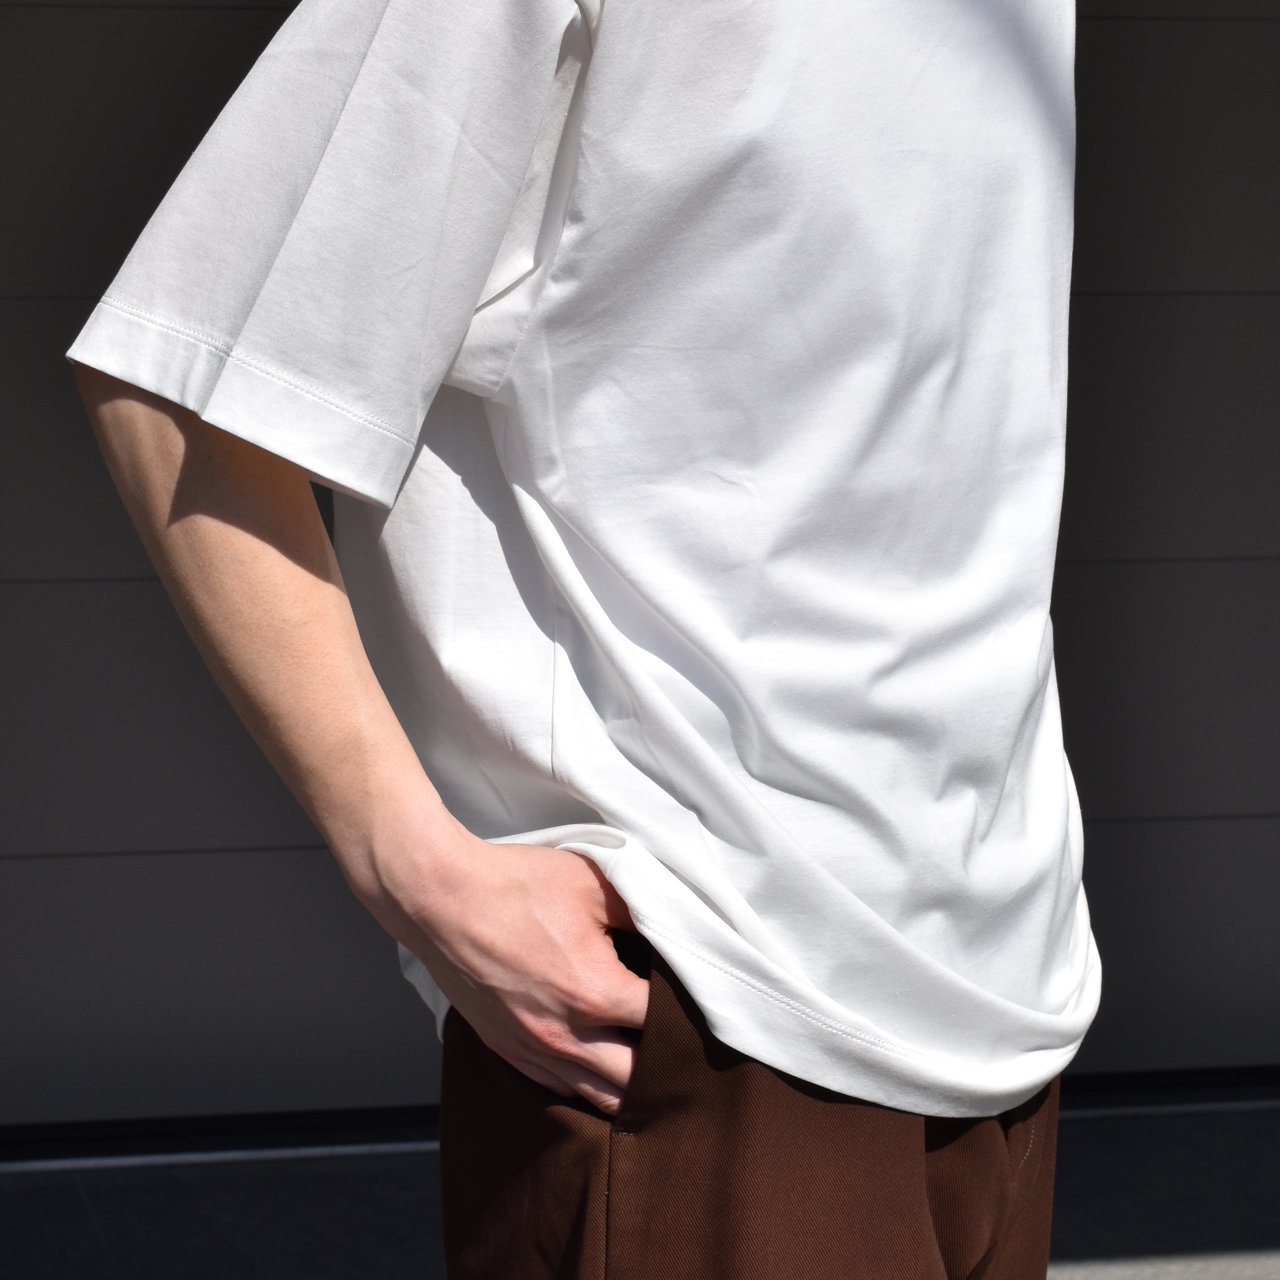 <img class='new_mark_img1' src='https://img.shop-pro.jp/img/new/icons5.gif' style='border:none;display:inline;margin:0px;padding:0px;width:auto;' />MARKAWARE (ޡ)COMFORT FIT Tee WHITE -ORGANIC GIZA 80/2 KNIT-